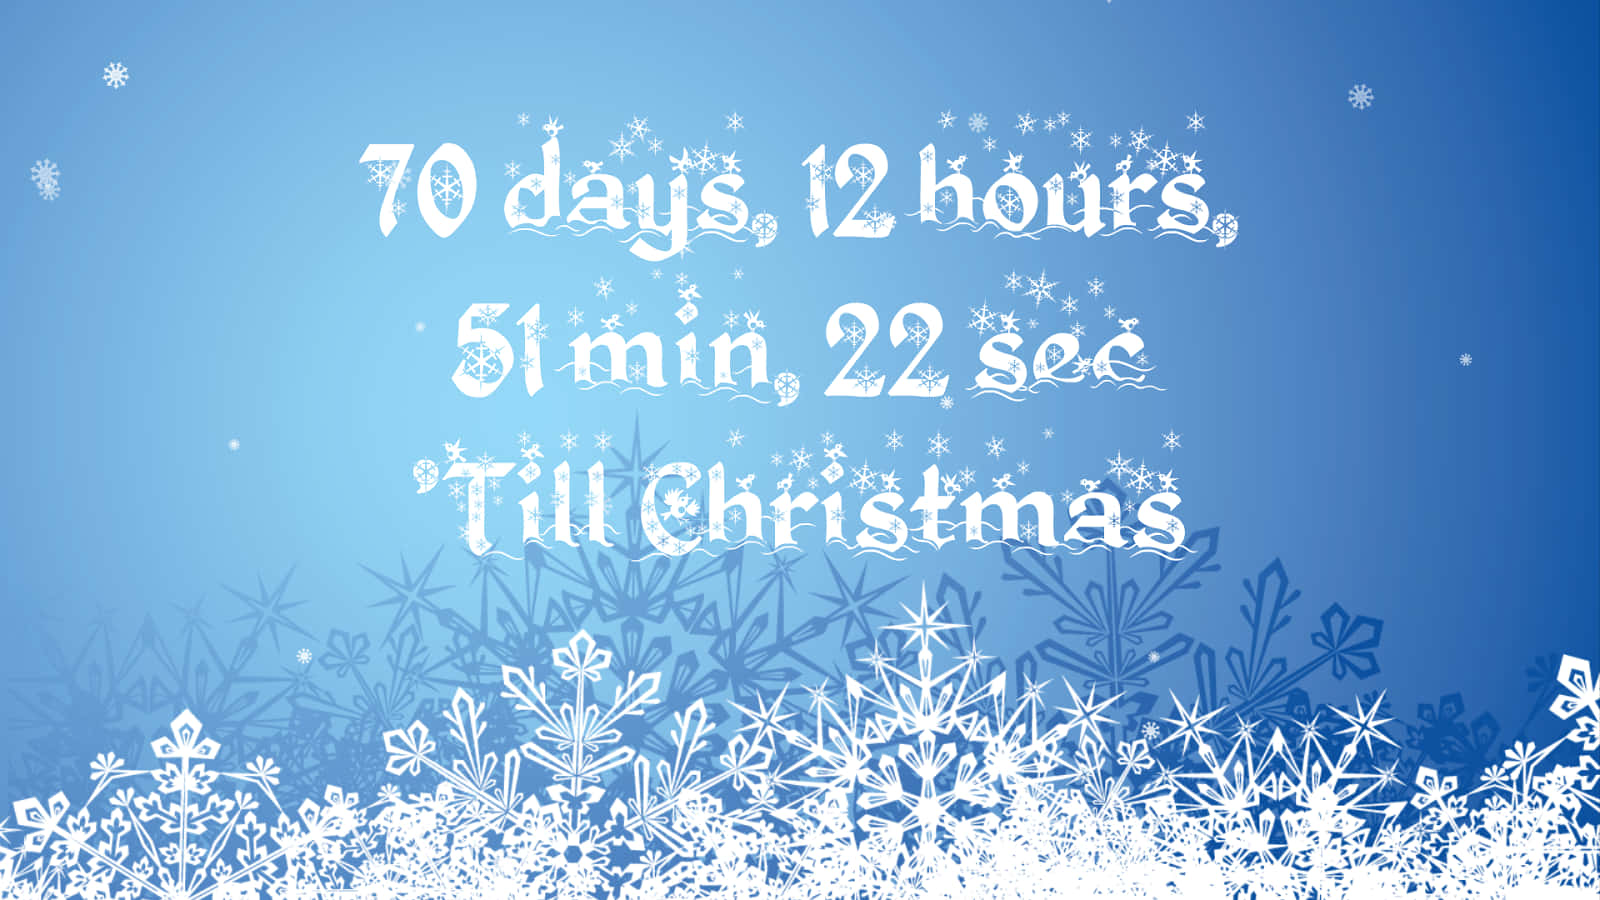 Get excited! It's almost Christmas - The Christmas Countdown begins. Wallpaper